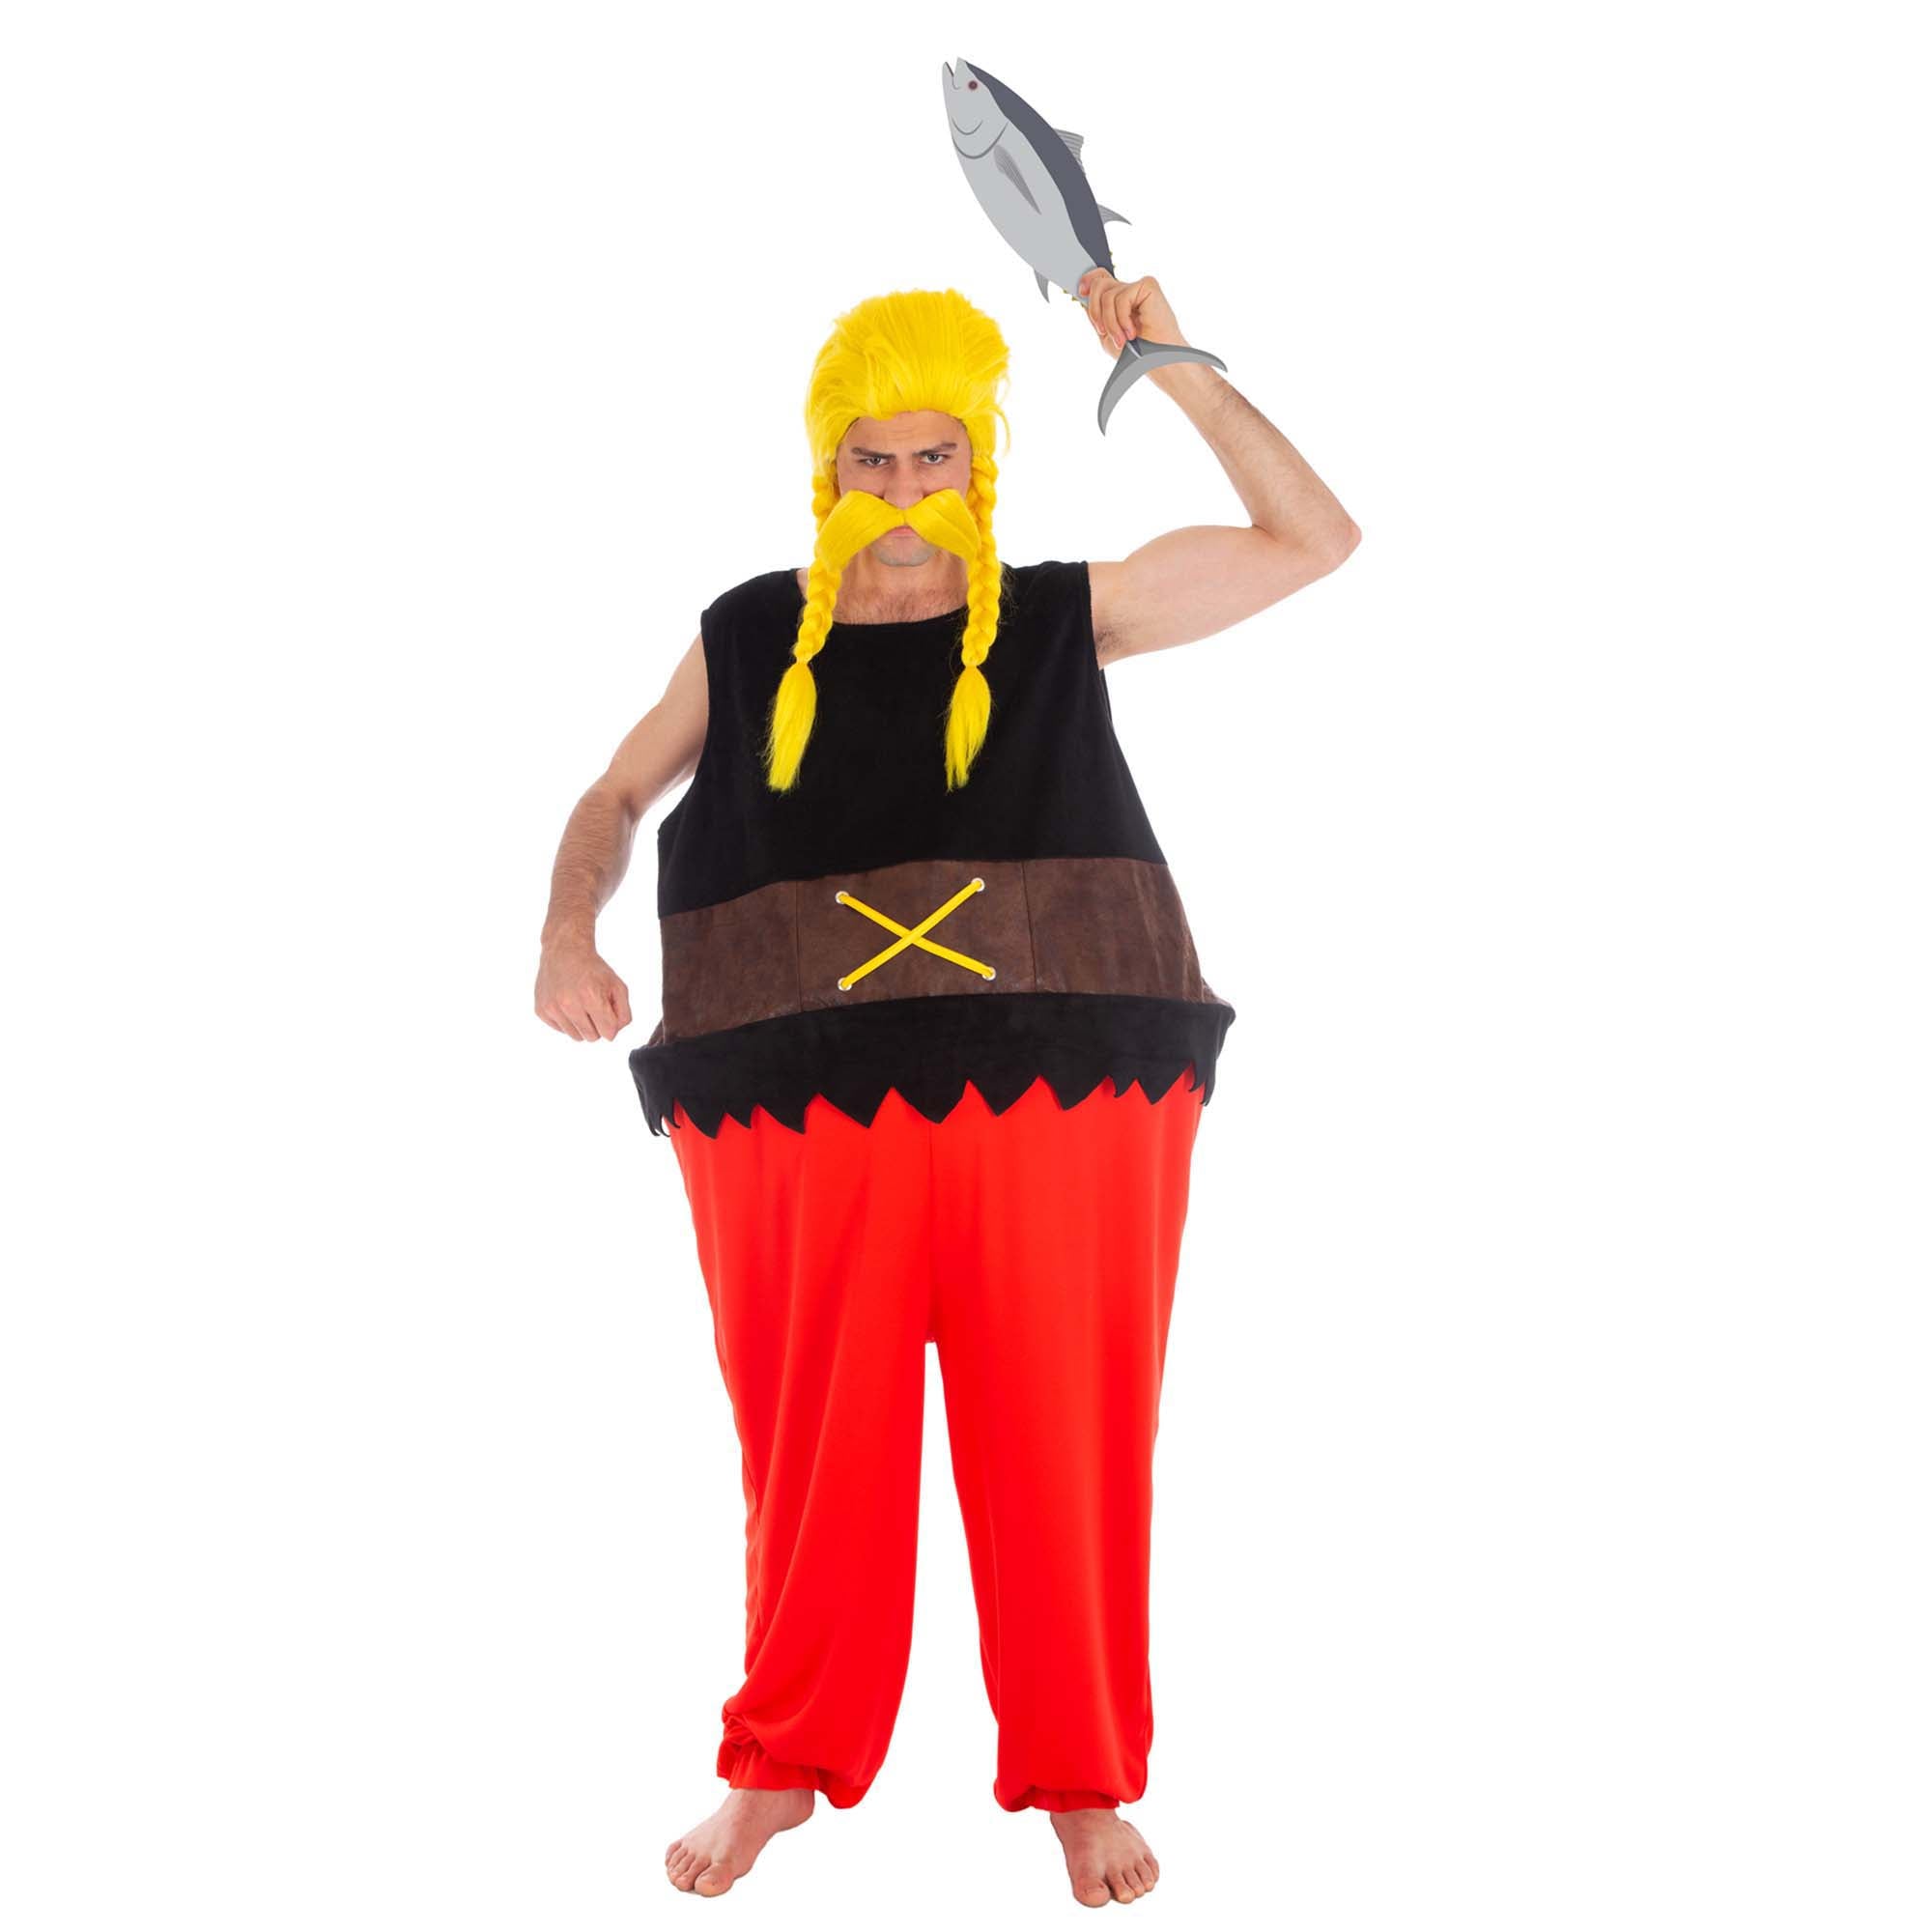 Ordralfabetix Costume for Adults, Asterix and Obelix